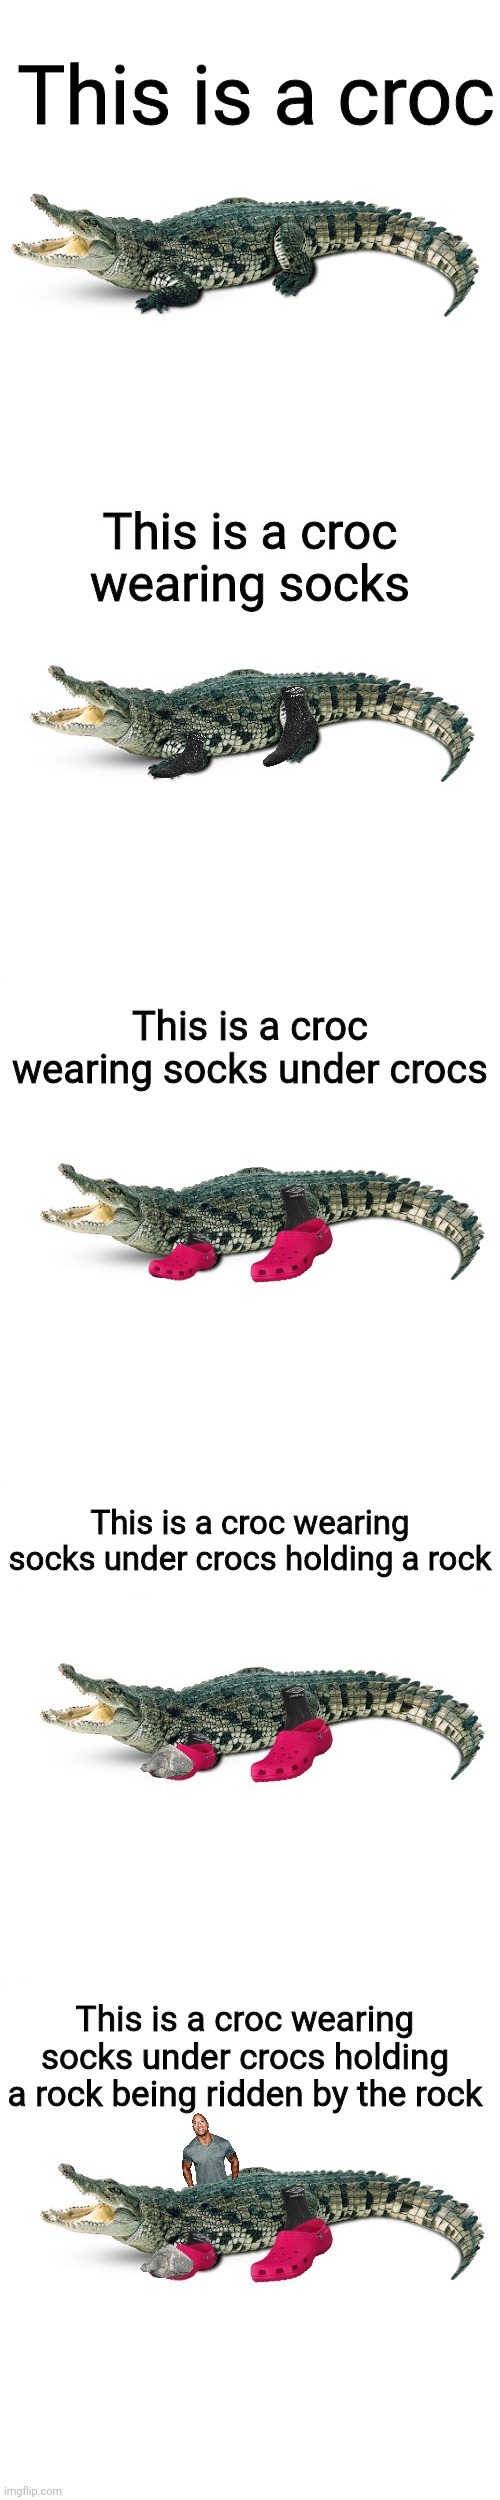 Meanwhile in florida | image tagged in funny memes,memes,funny,meanwhile in florida,lol,crocodile | made w/ Imgflip meme maker